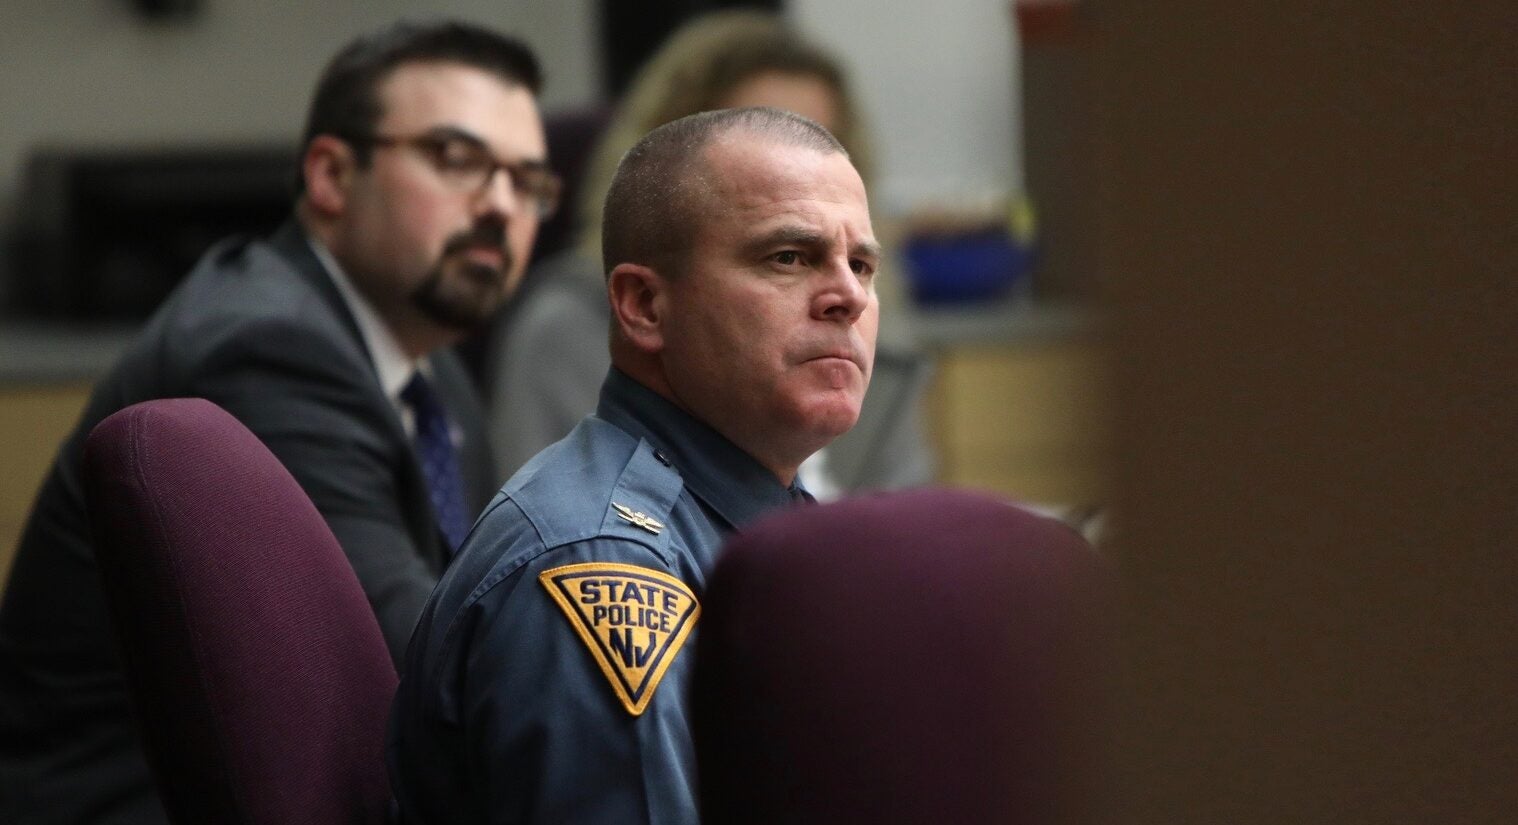 New Jersey State Police Superintendent Patrick Callahan attends a coronavirus briefing held by Gov. Phil Murphy in Trenton on March 23, 2020 (Edwin J. Torres for Governor’s Office).